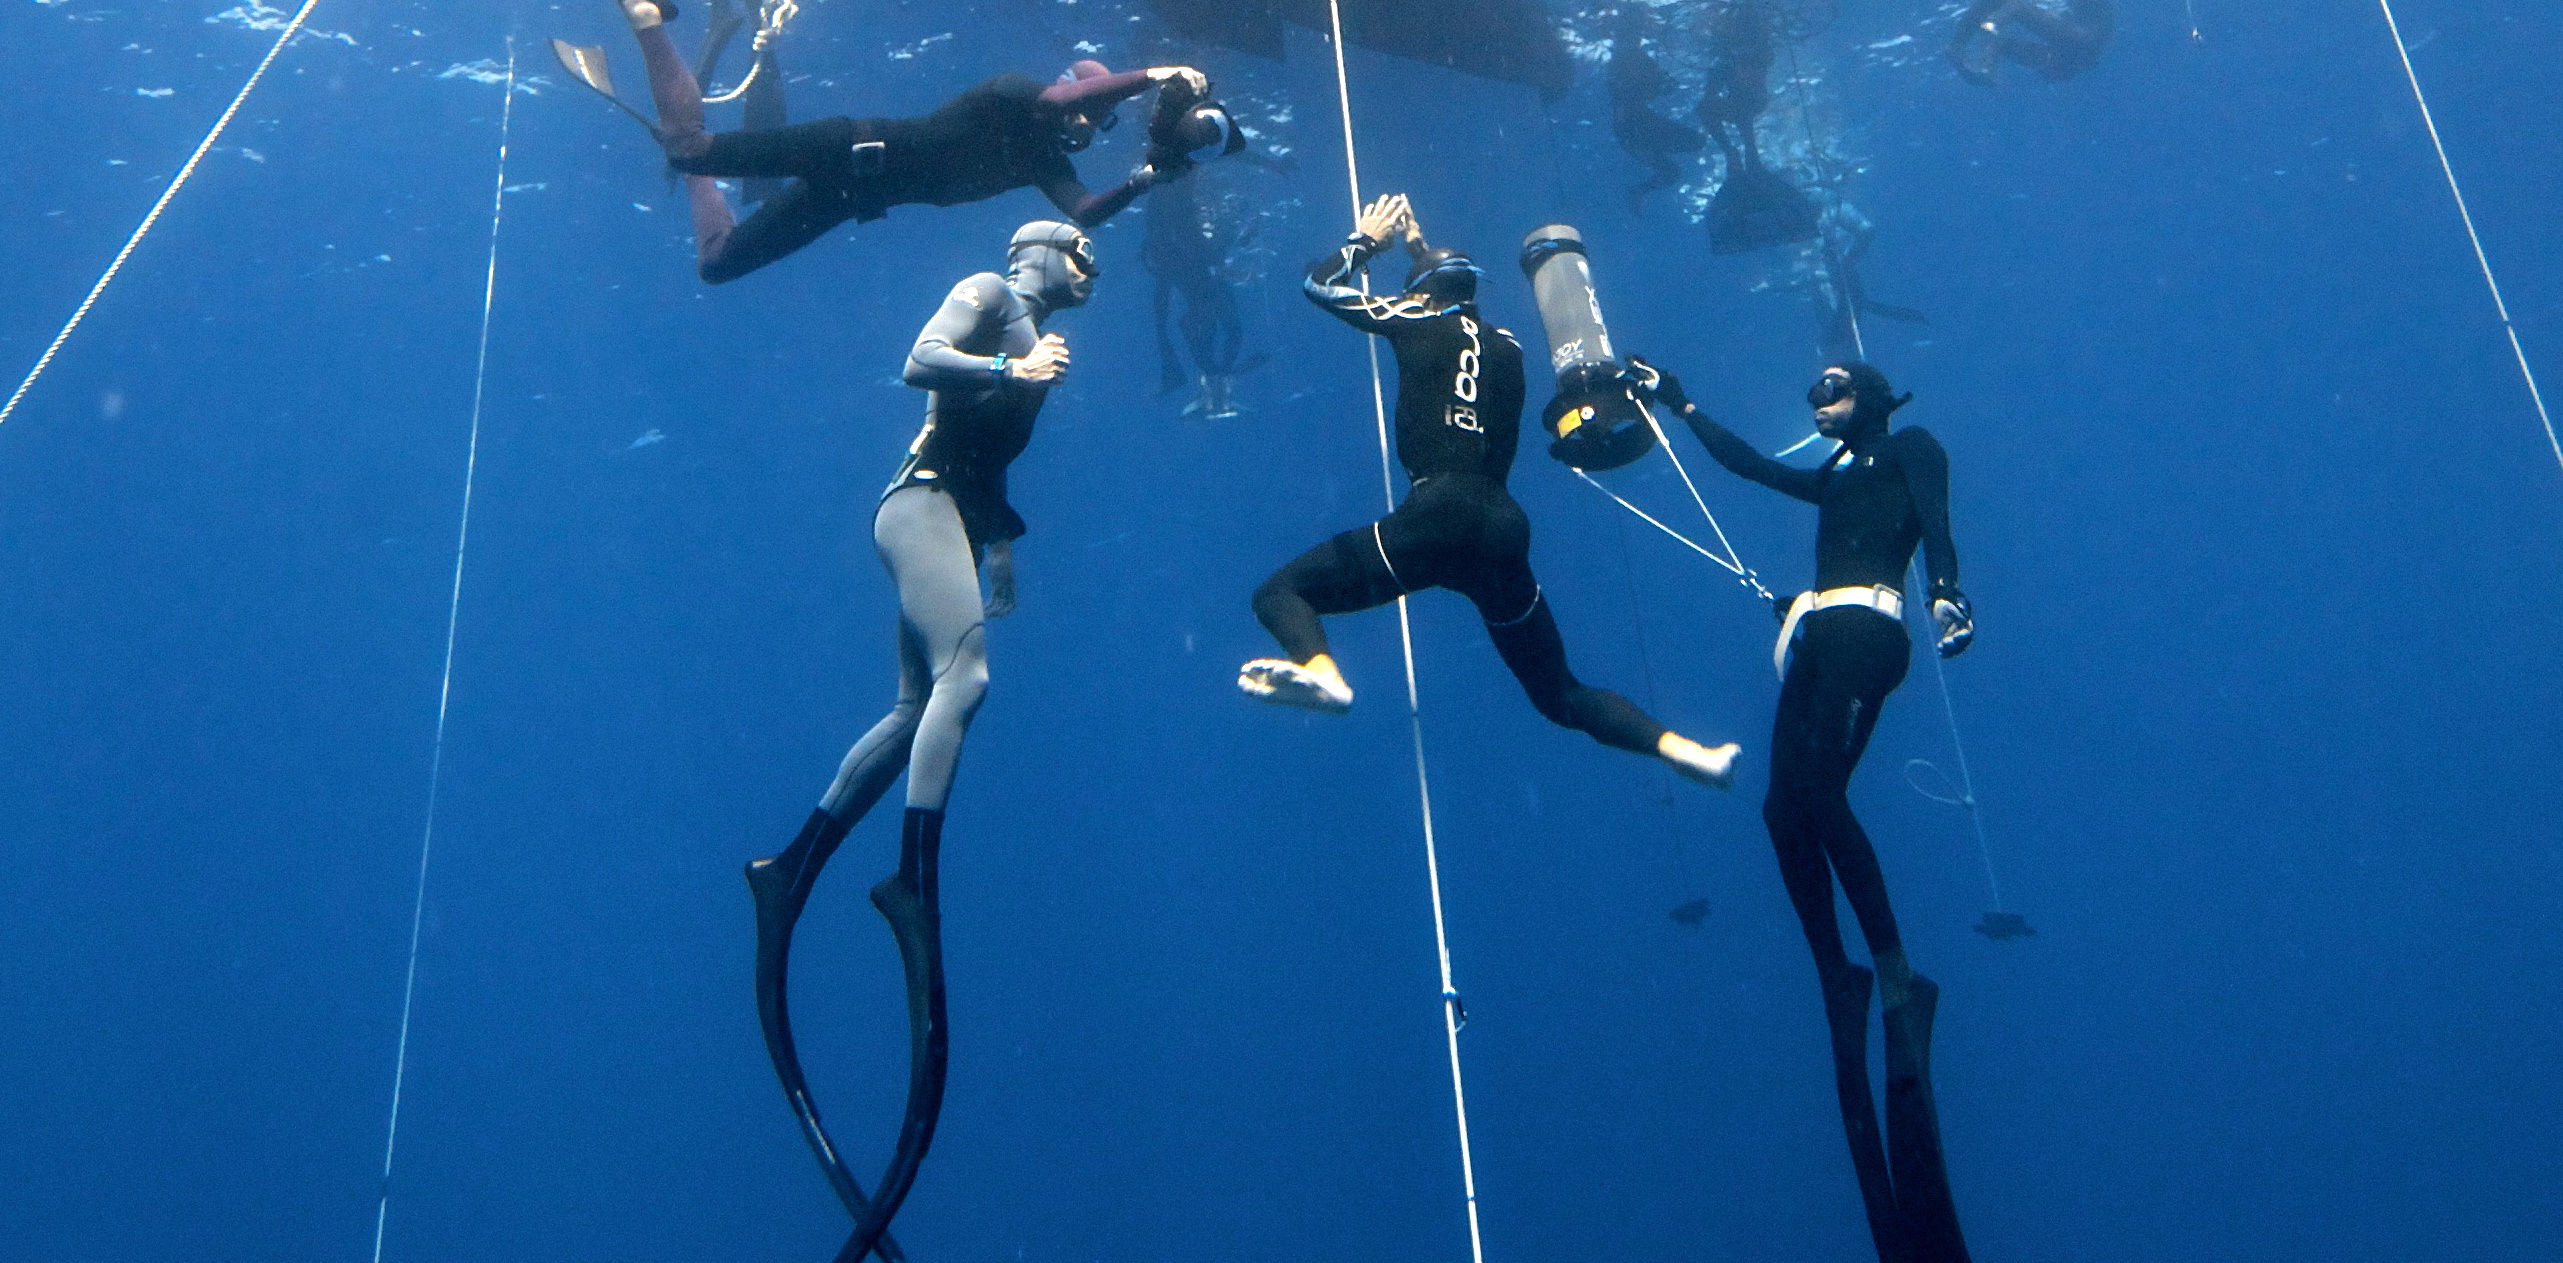 Freediving: Recreational breath-hold diving with cameras, Adventure and exploration. 2570x1270 Dual Screen Wallpaper.